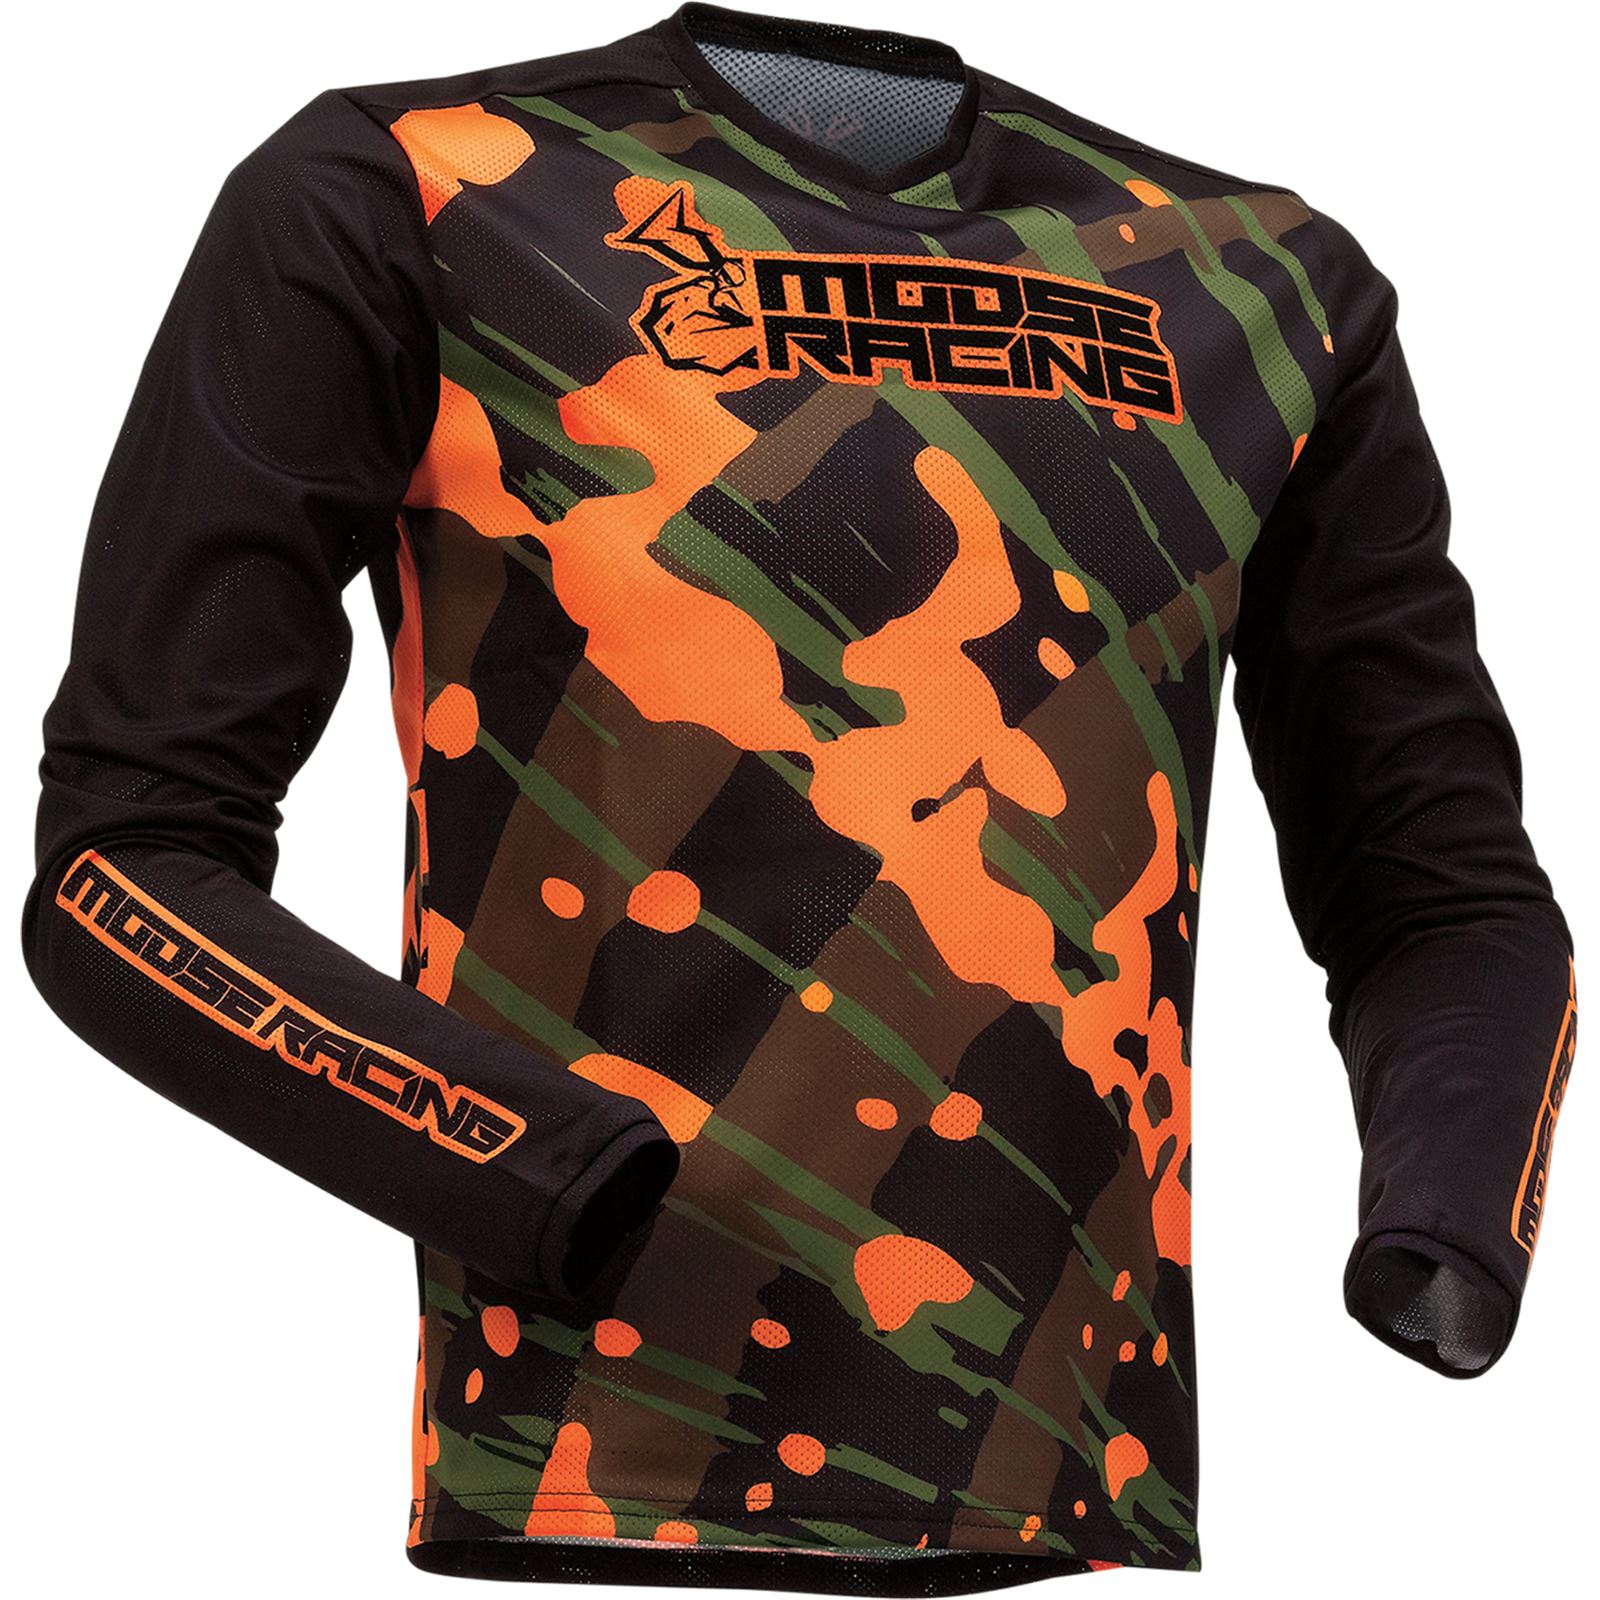 Moose Racing Youth Agroid Mesh Jersey - Olive/Orange - Small